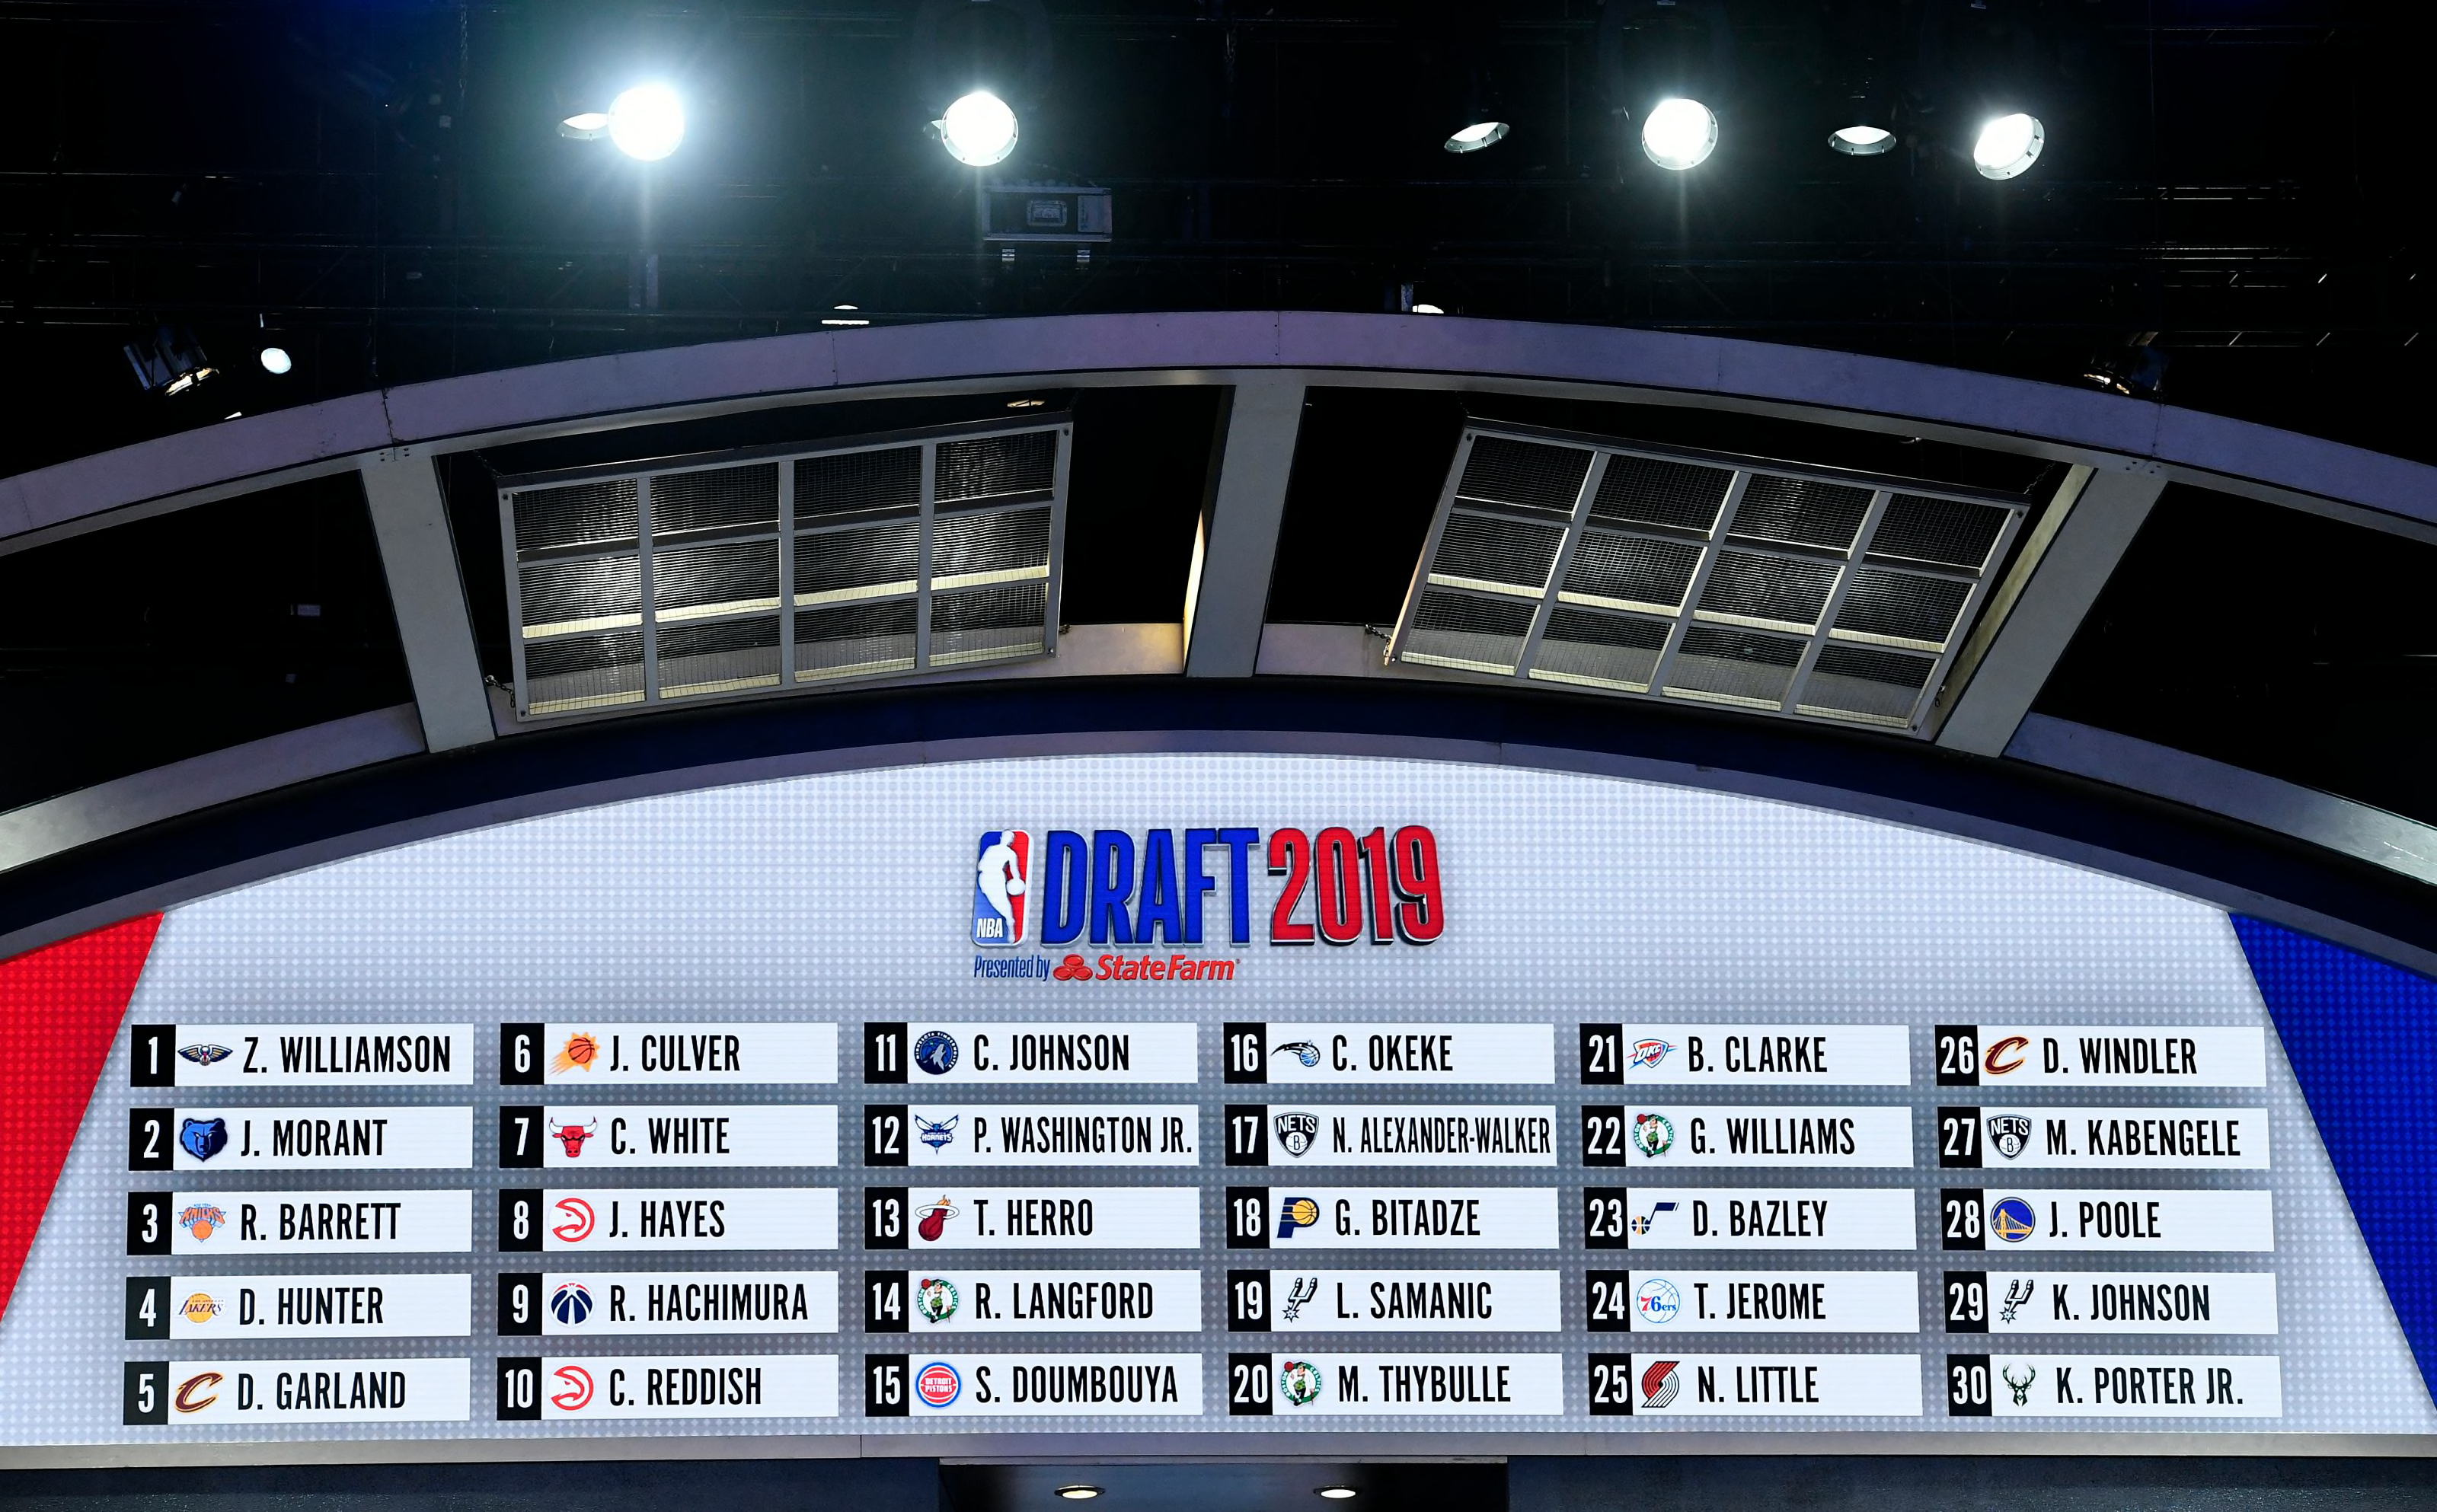 New Orleans Pelicans: 2nd-round mock NBA Draft